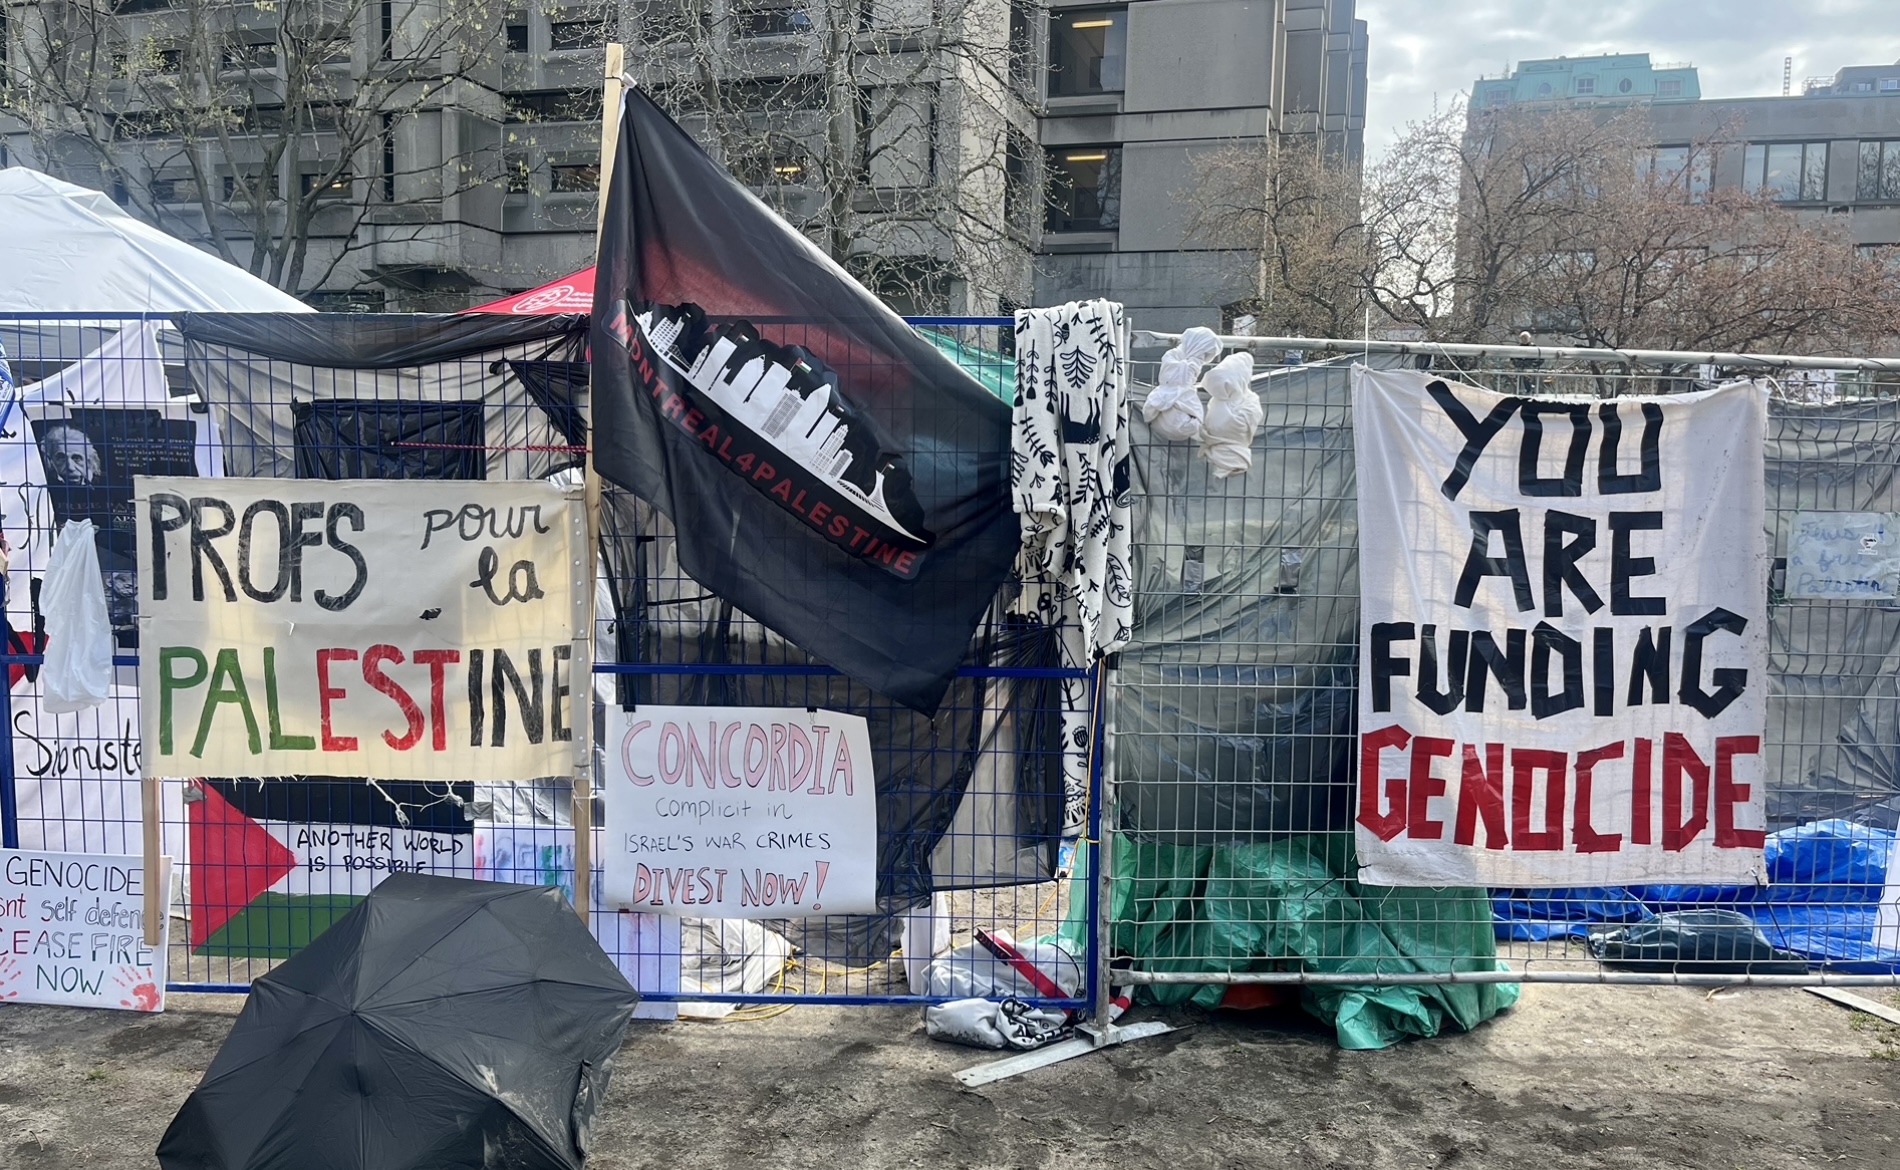 McGill protesters don’t want their university to profit from Israeli apartheid and genocide — it’s that simple